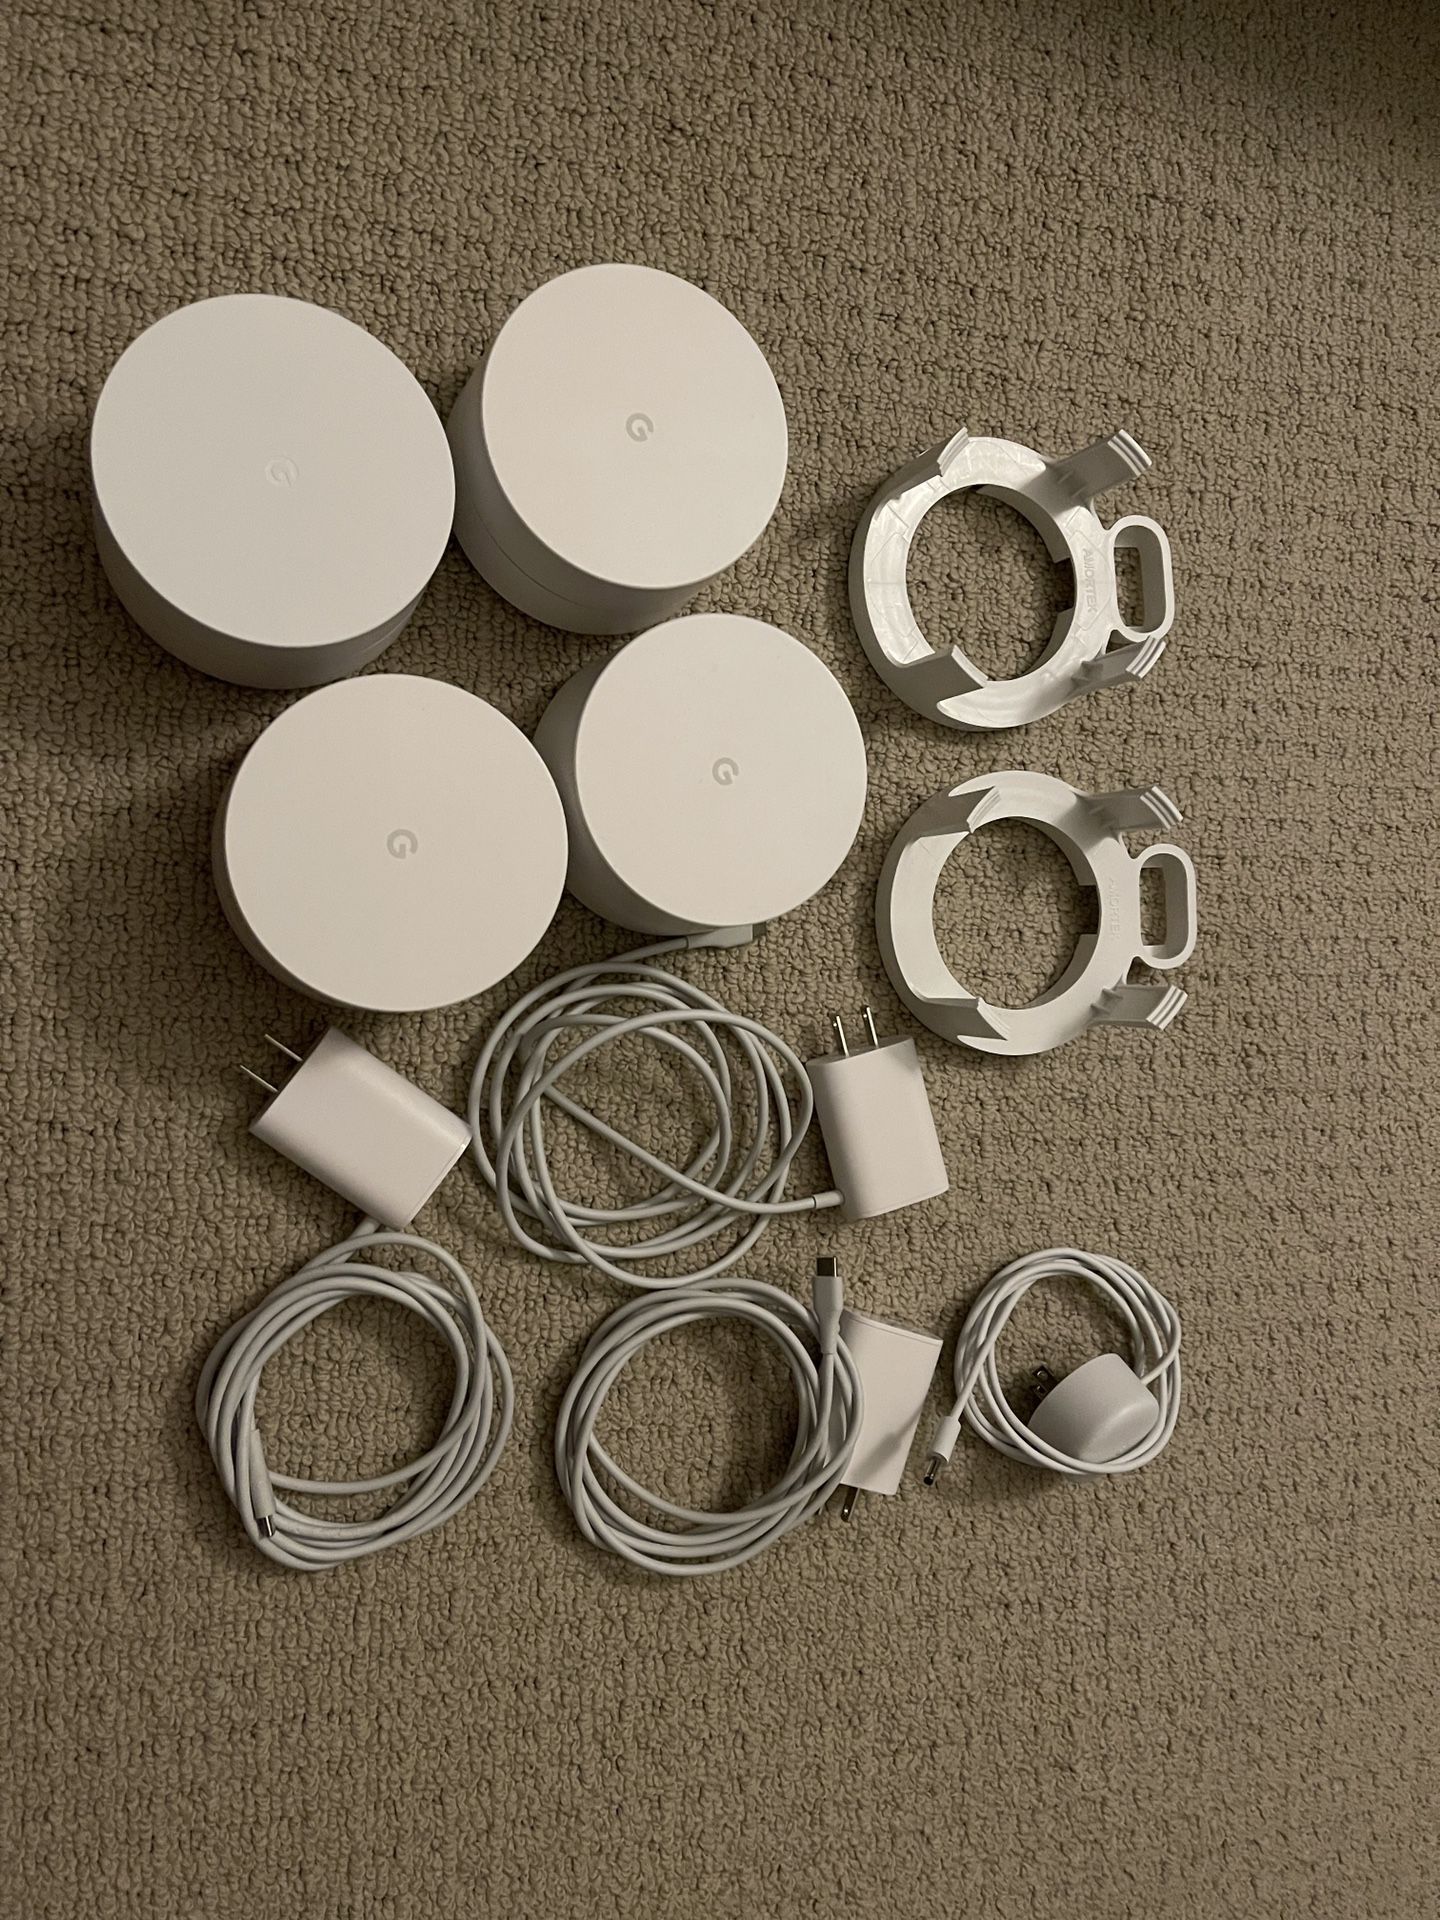 Google Mesh Wi-Fi Router and Extenders